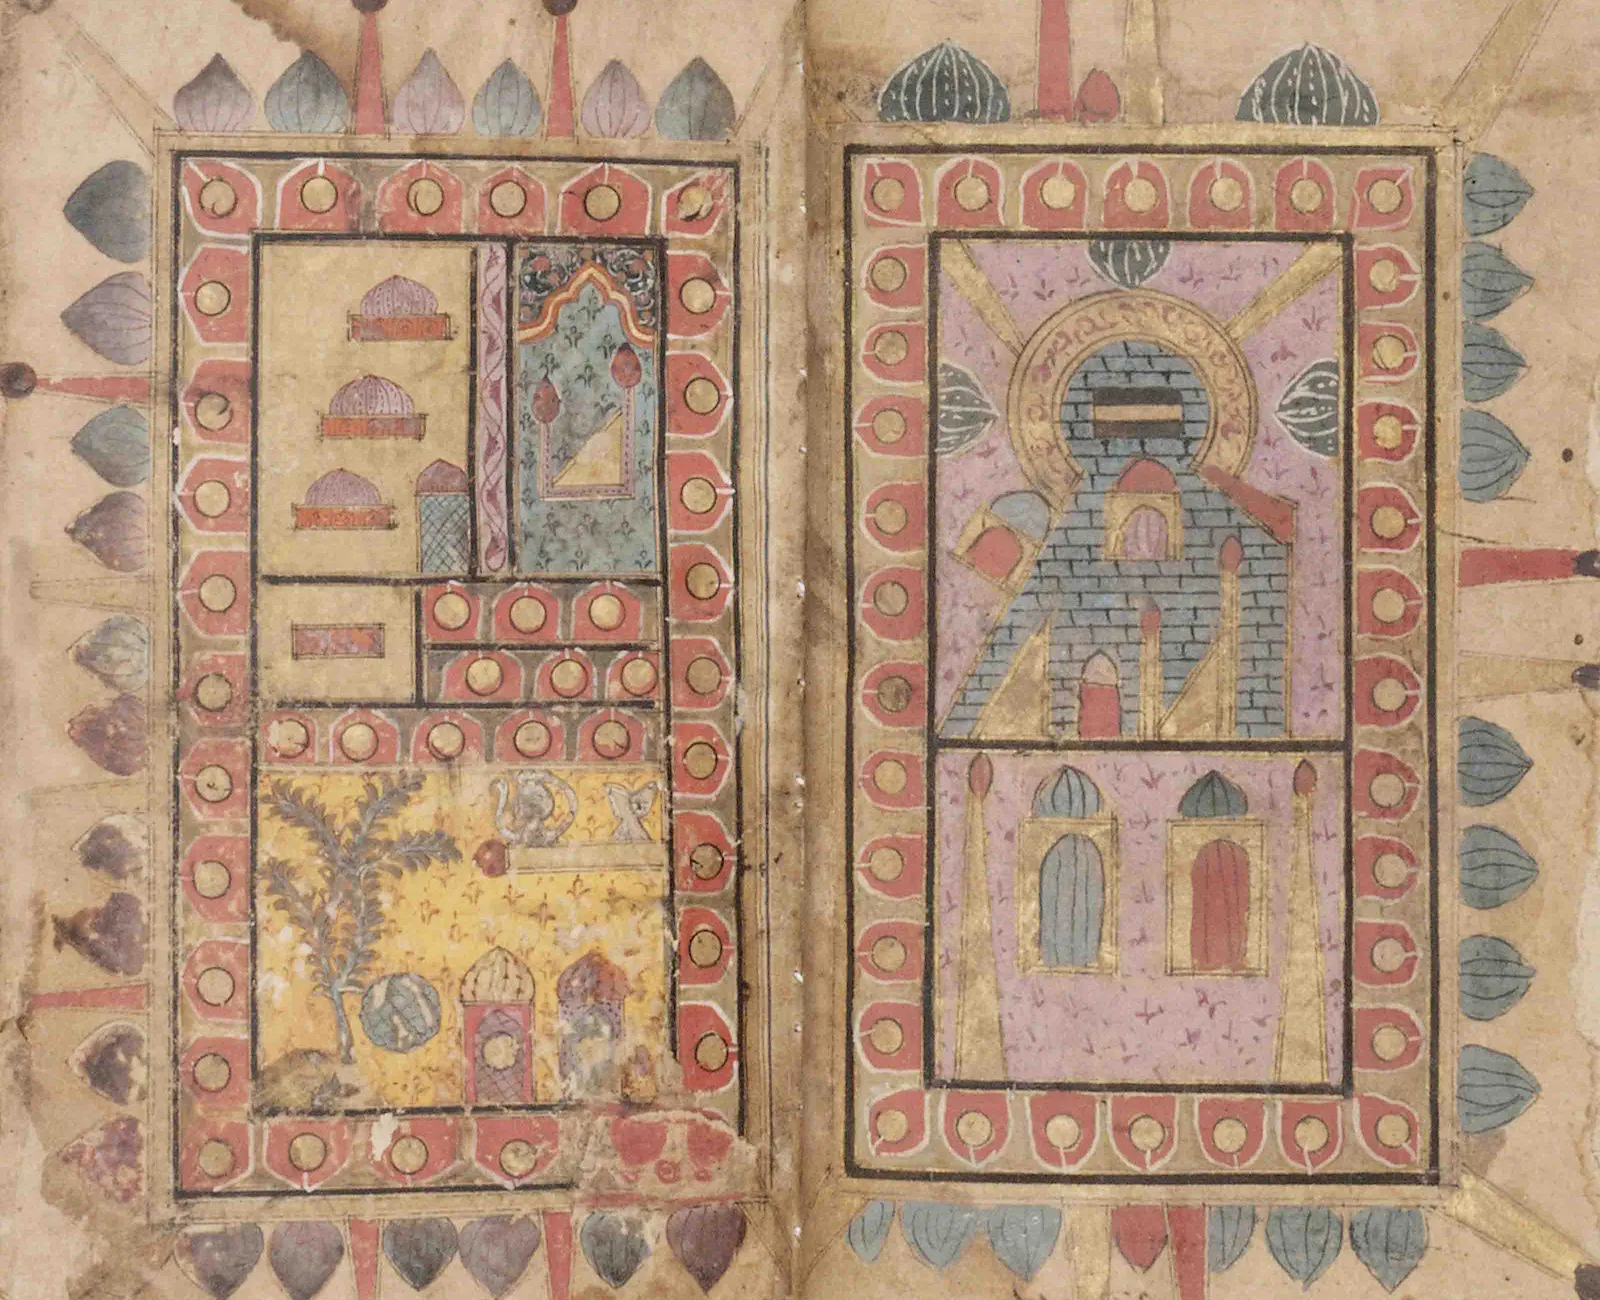 Double page depicting the Holy Sanctuaries in Mecca and Medina. Kashmir. Dated 19th century.